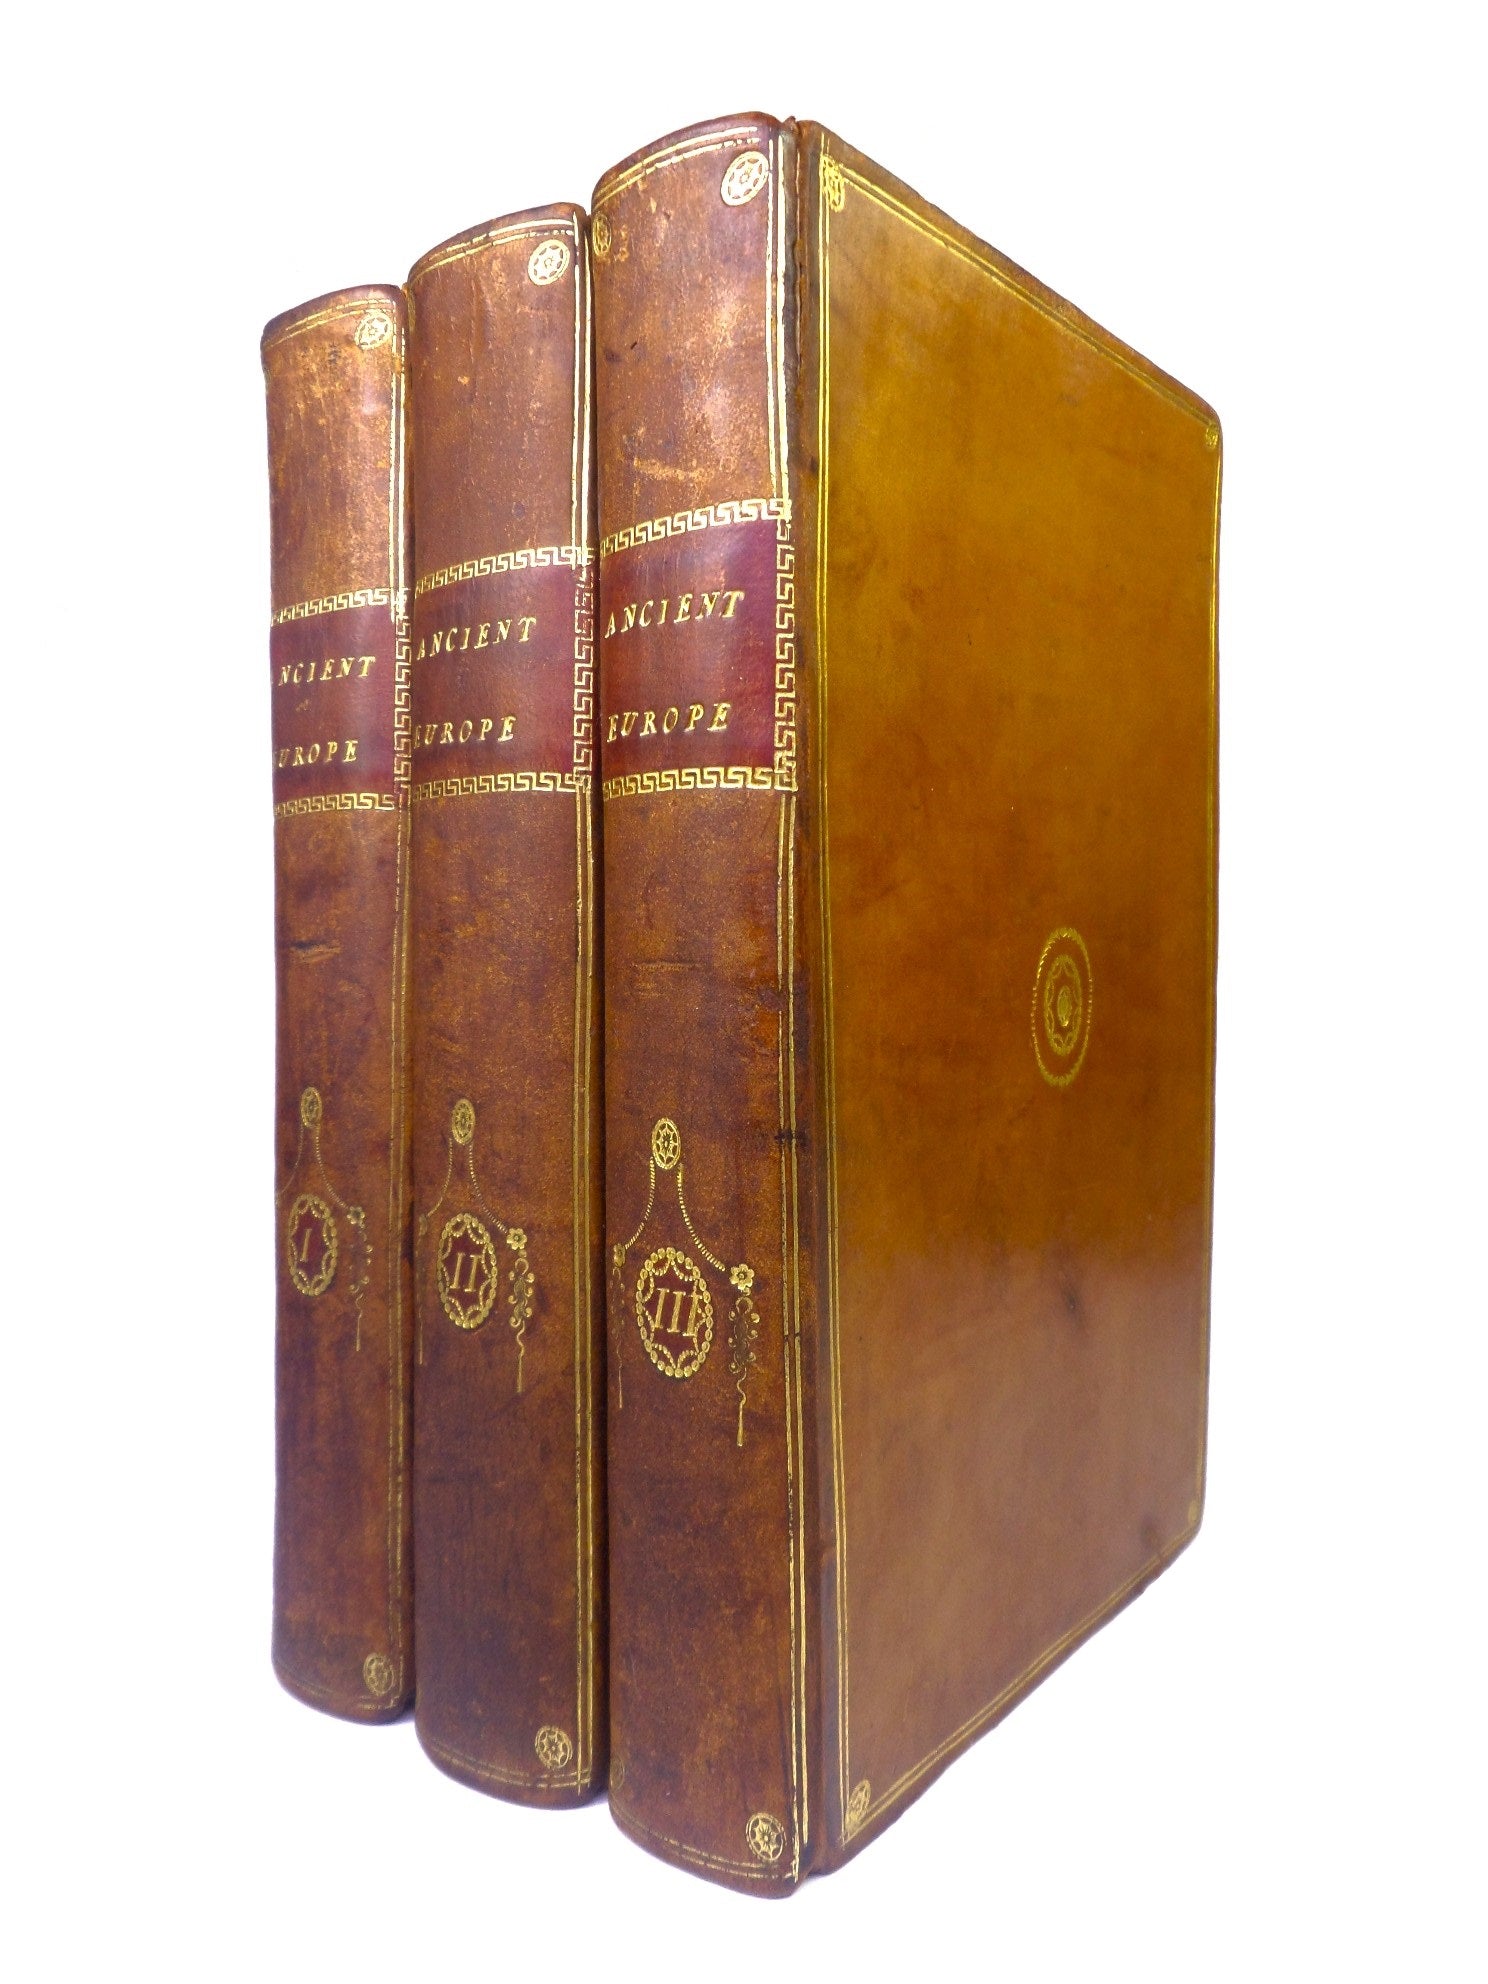 THE HISTORY OF ANCIENT EUROPE BY CHARLES COOTE 1815 LEATHER BOUND